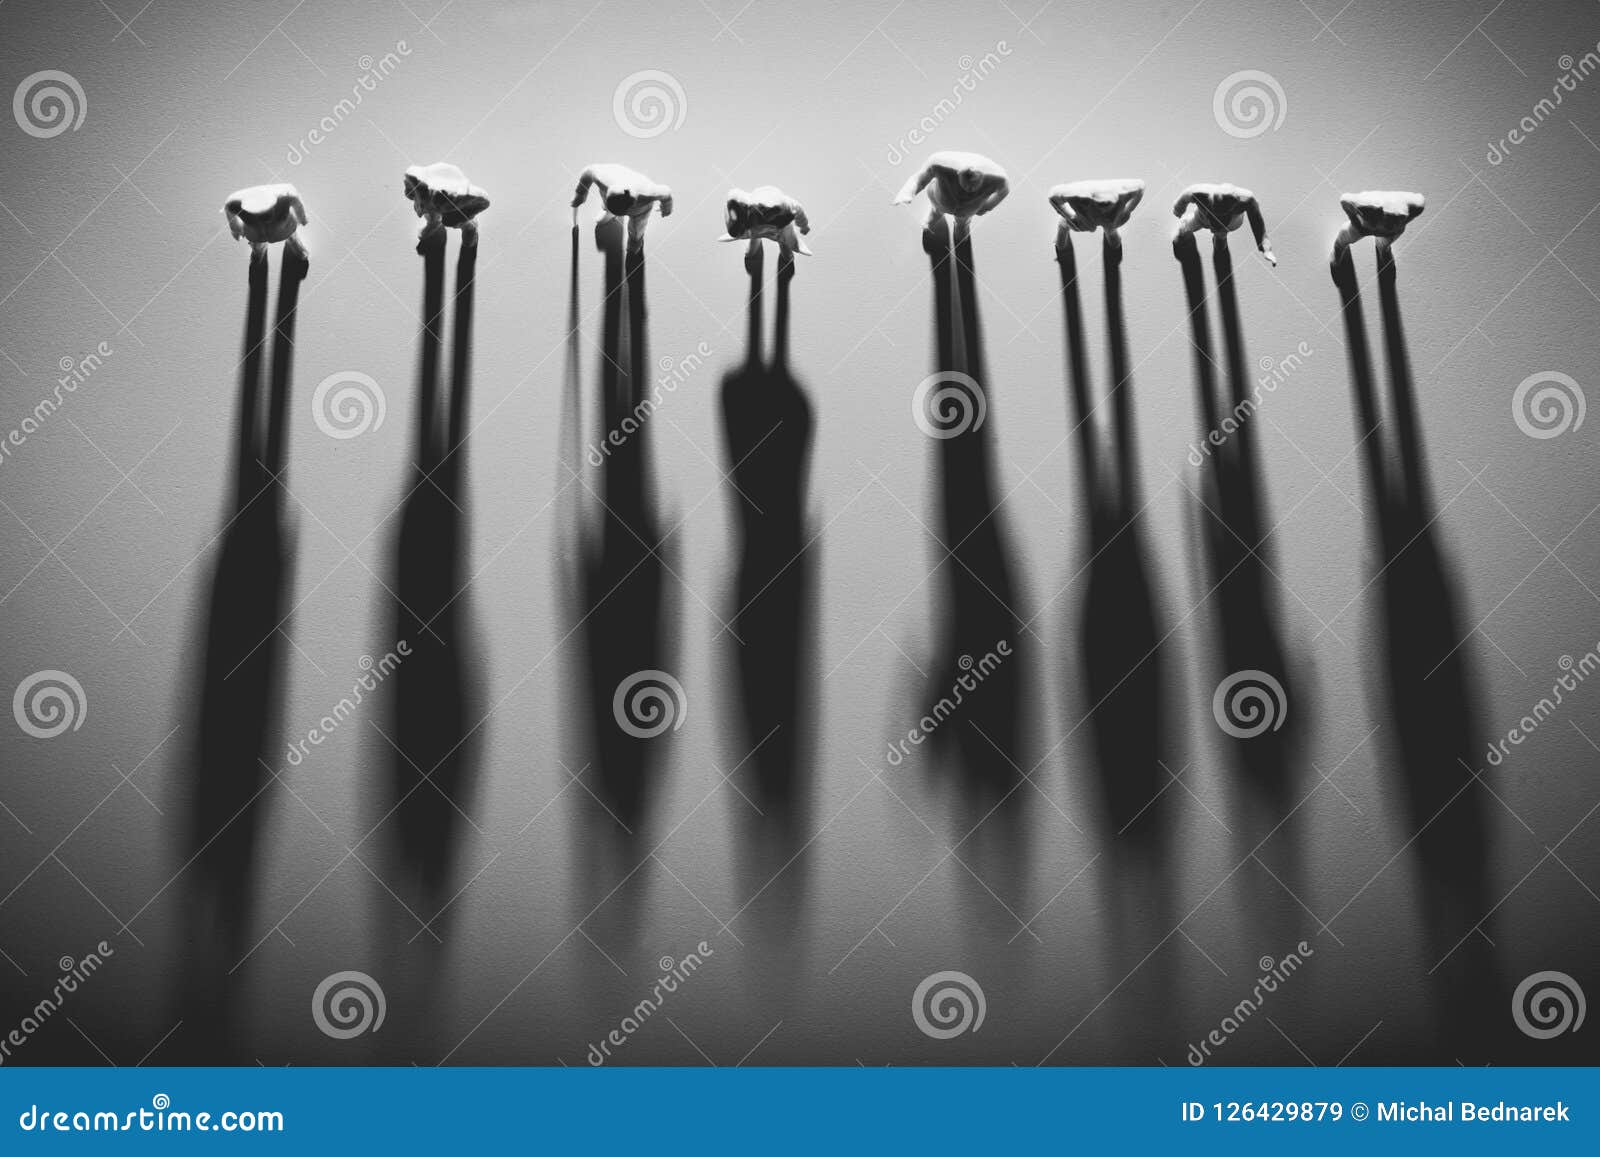 people figures standing in a row, casting shadows.